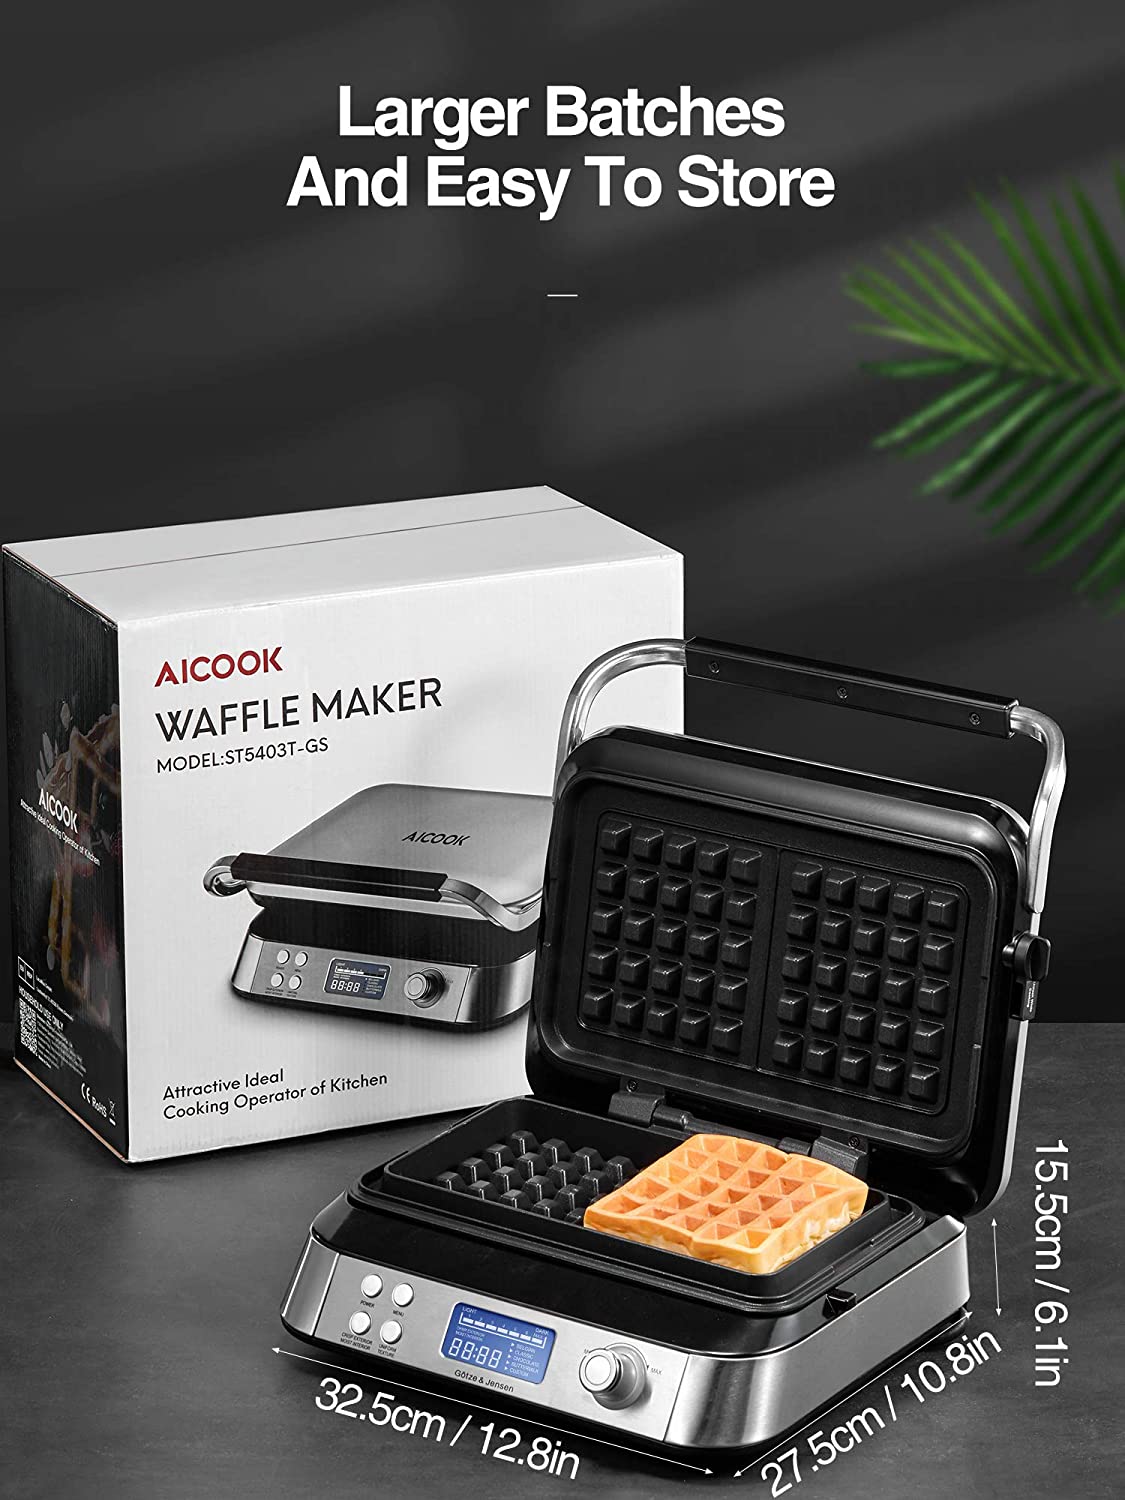 AICOOK | Waffle Maker 1600w, Smart Pro Belgian Waffle Iron with LCD Display, 2-Slice, 5 Different Programs, 7 Browning Levels, Recipe Included, Silver, Large Batches and Easy To Store